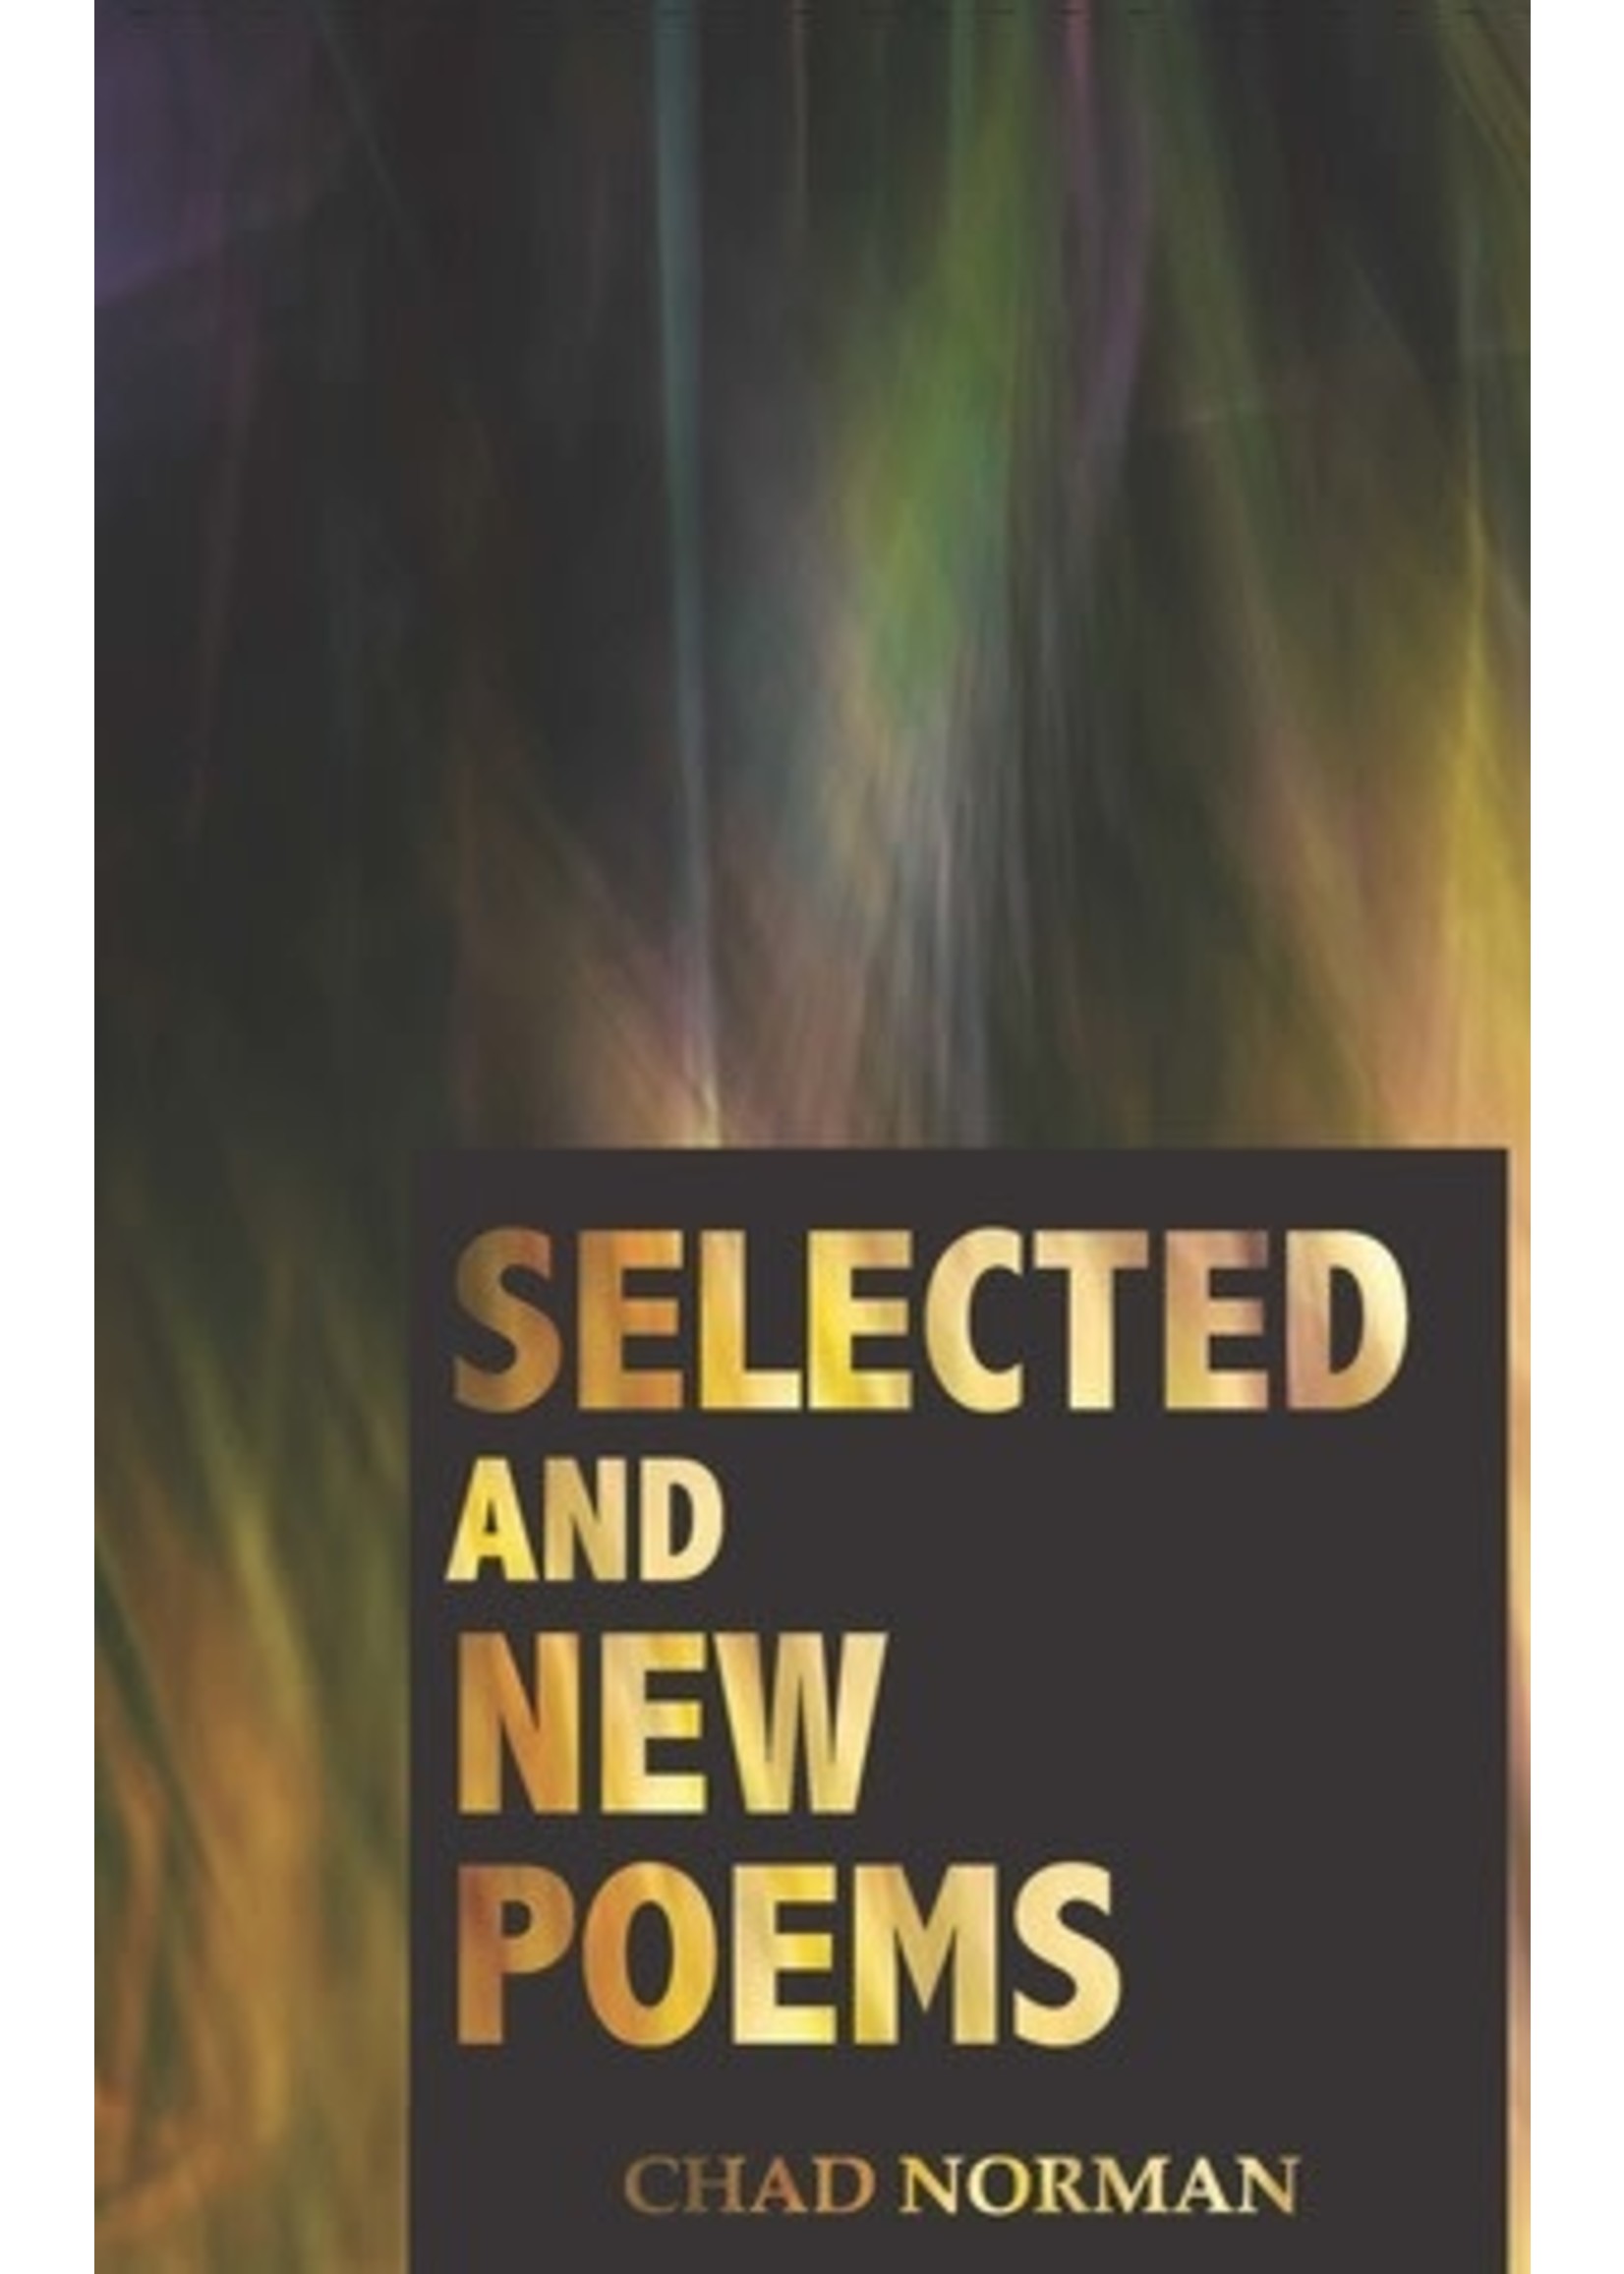 Selected and New Poems by Chad Norman